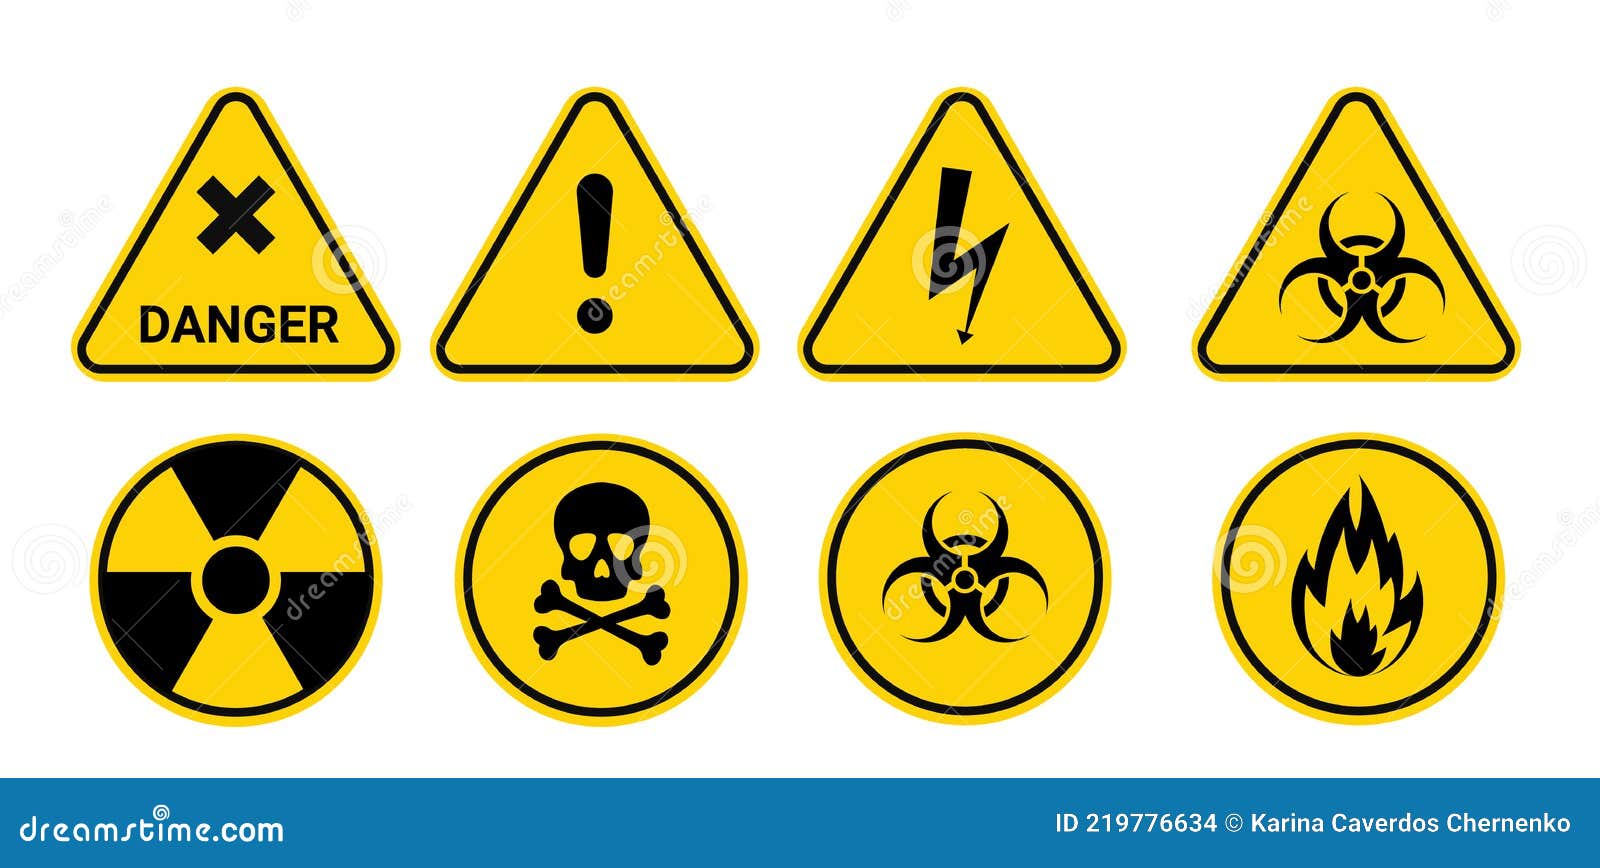 https://thumbs.dreamstime.com/z/collection-biohazard-radiation-toxic-symbol-warning-danger-drawing-people-s-attention-to-fact-object-can-be-219776634.jpg